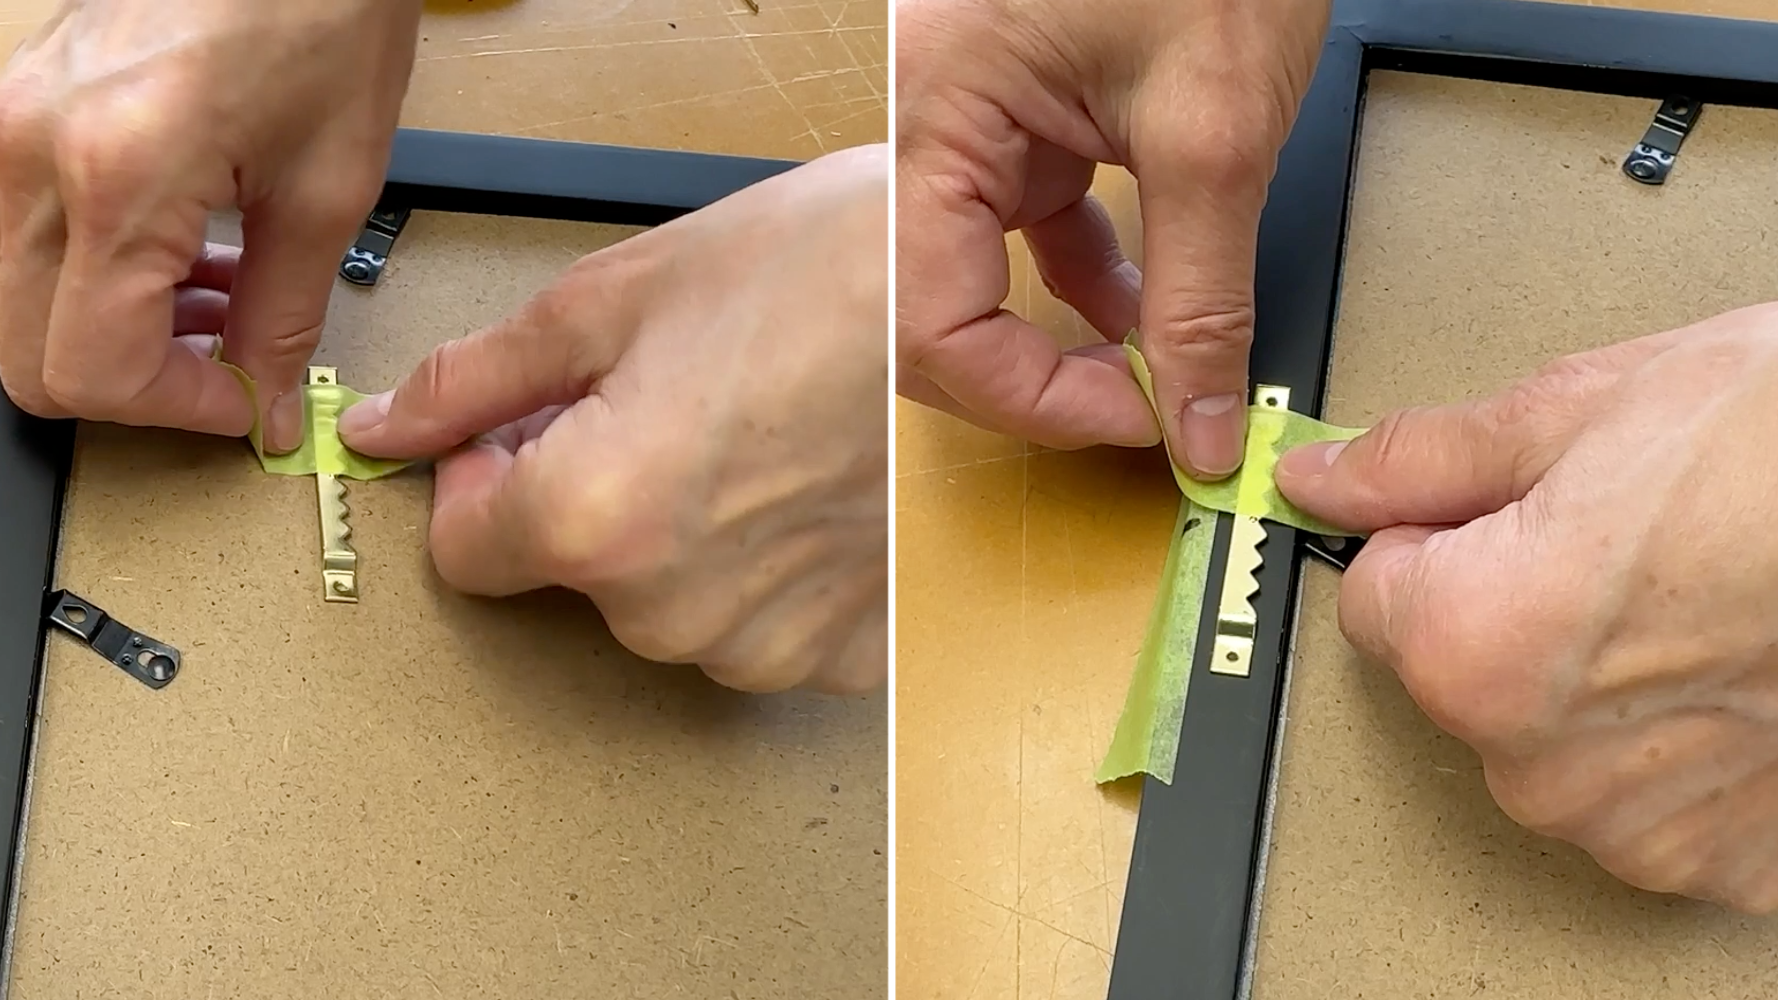 Using Painter's tape applied vertically to the sawtooth hanger, a person is aligning the hanger in the right spot on the back of a picture frame.